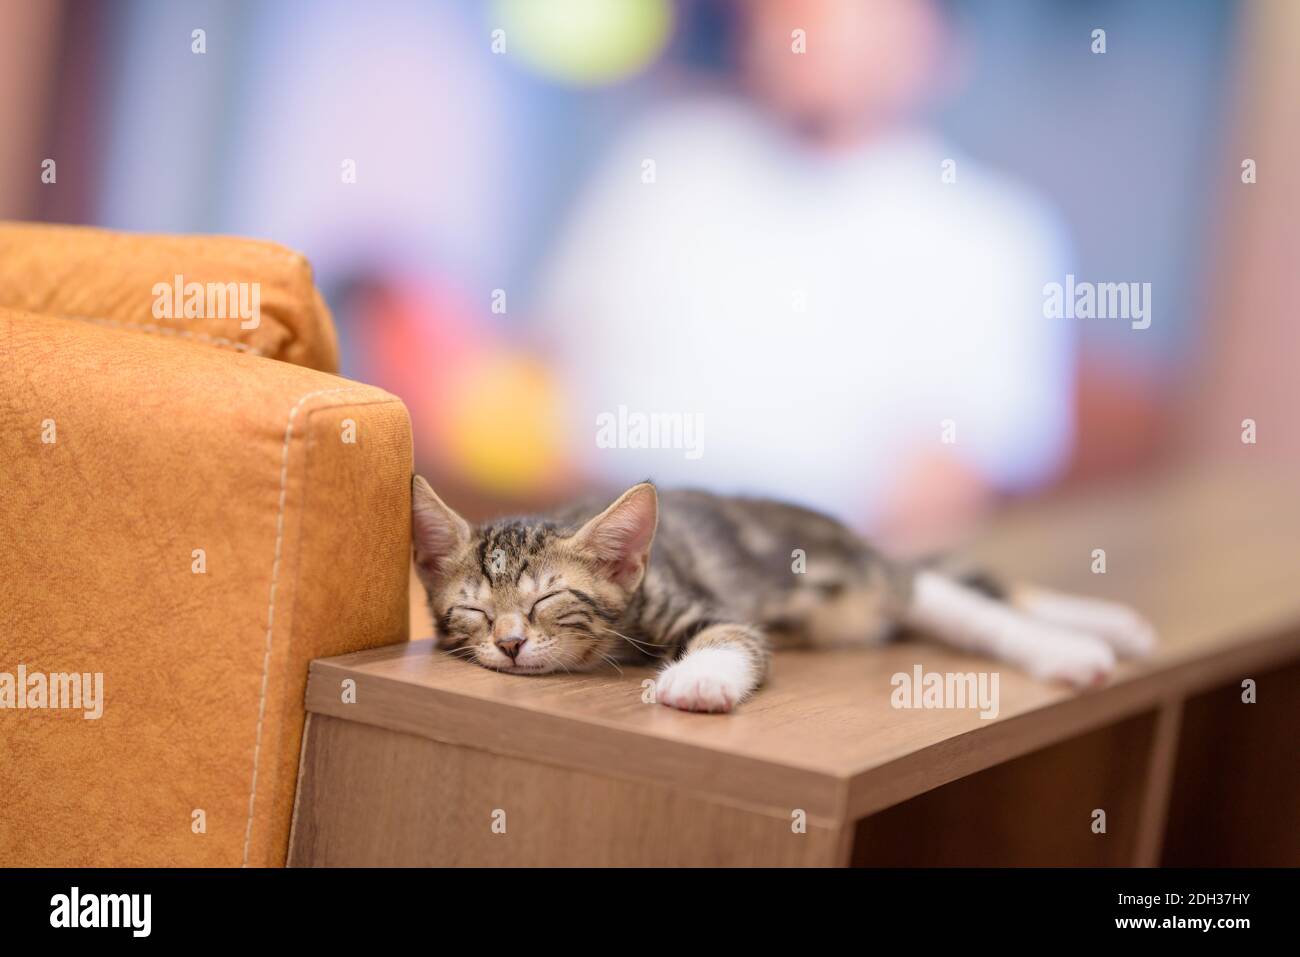 Two months old tabby kitten sleeping on blurry background Stock Photo